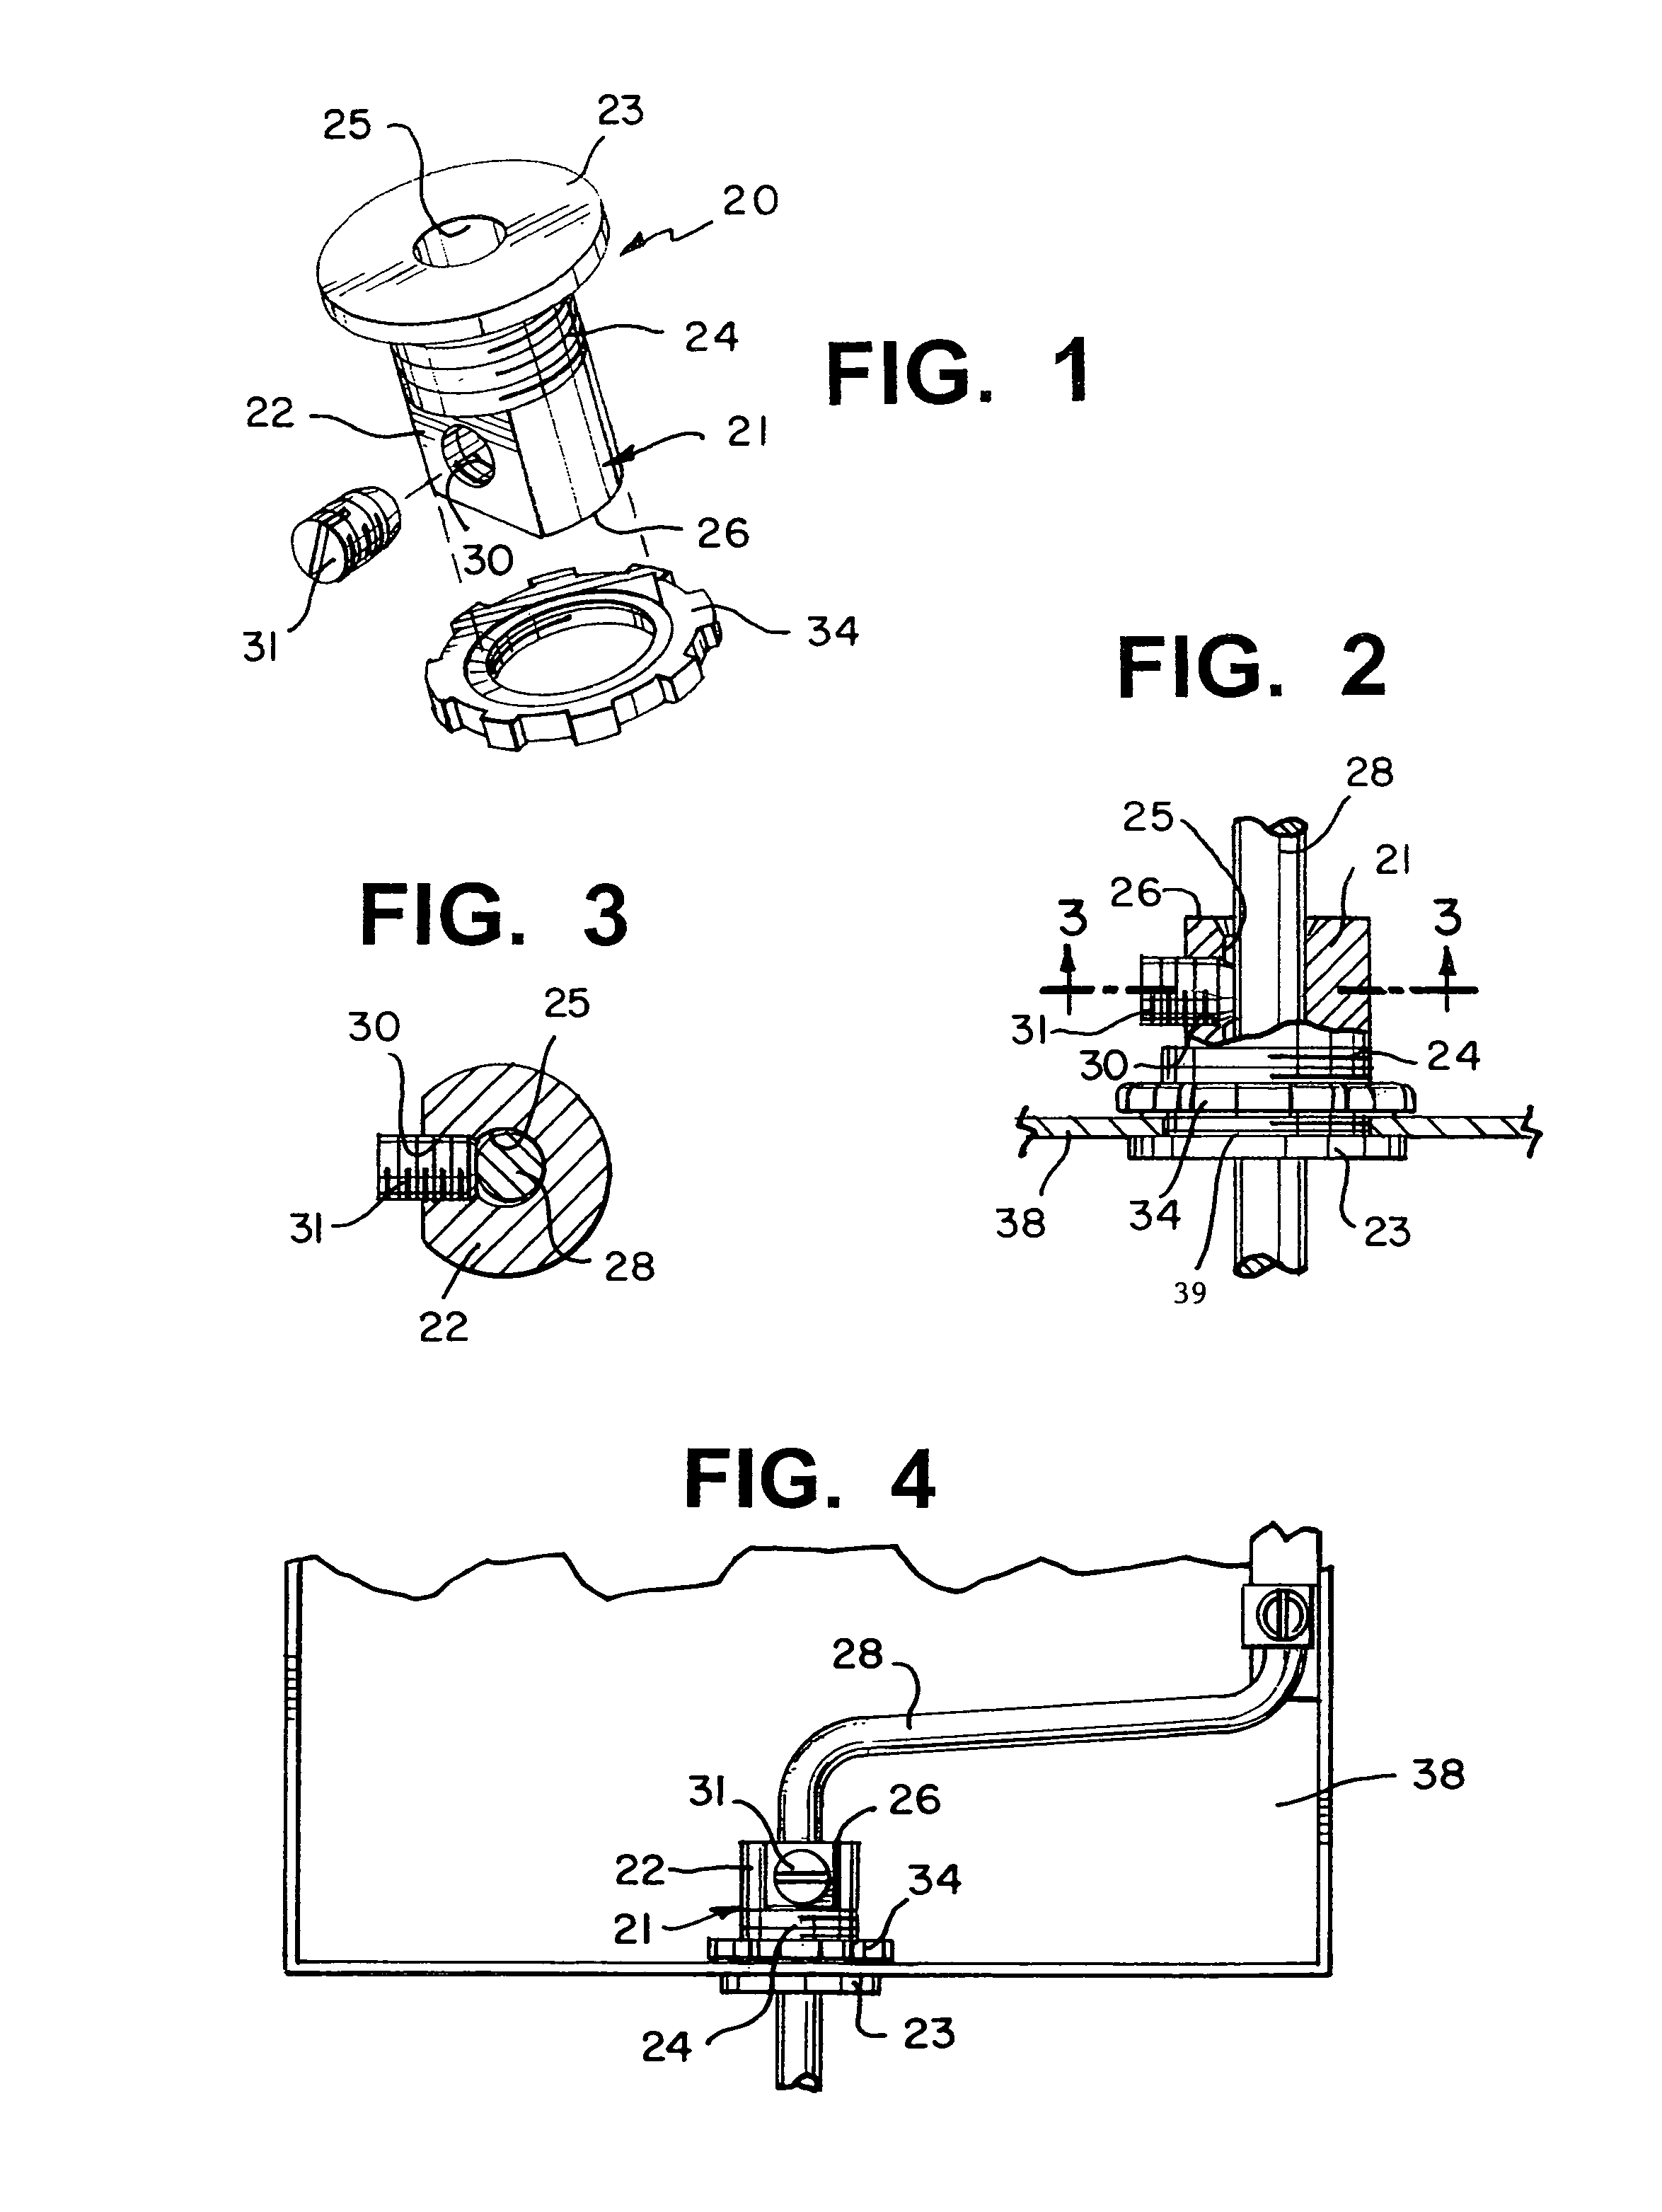 Bonding and grounding clamp/connector for electrode conductors